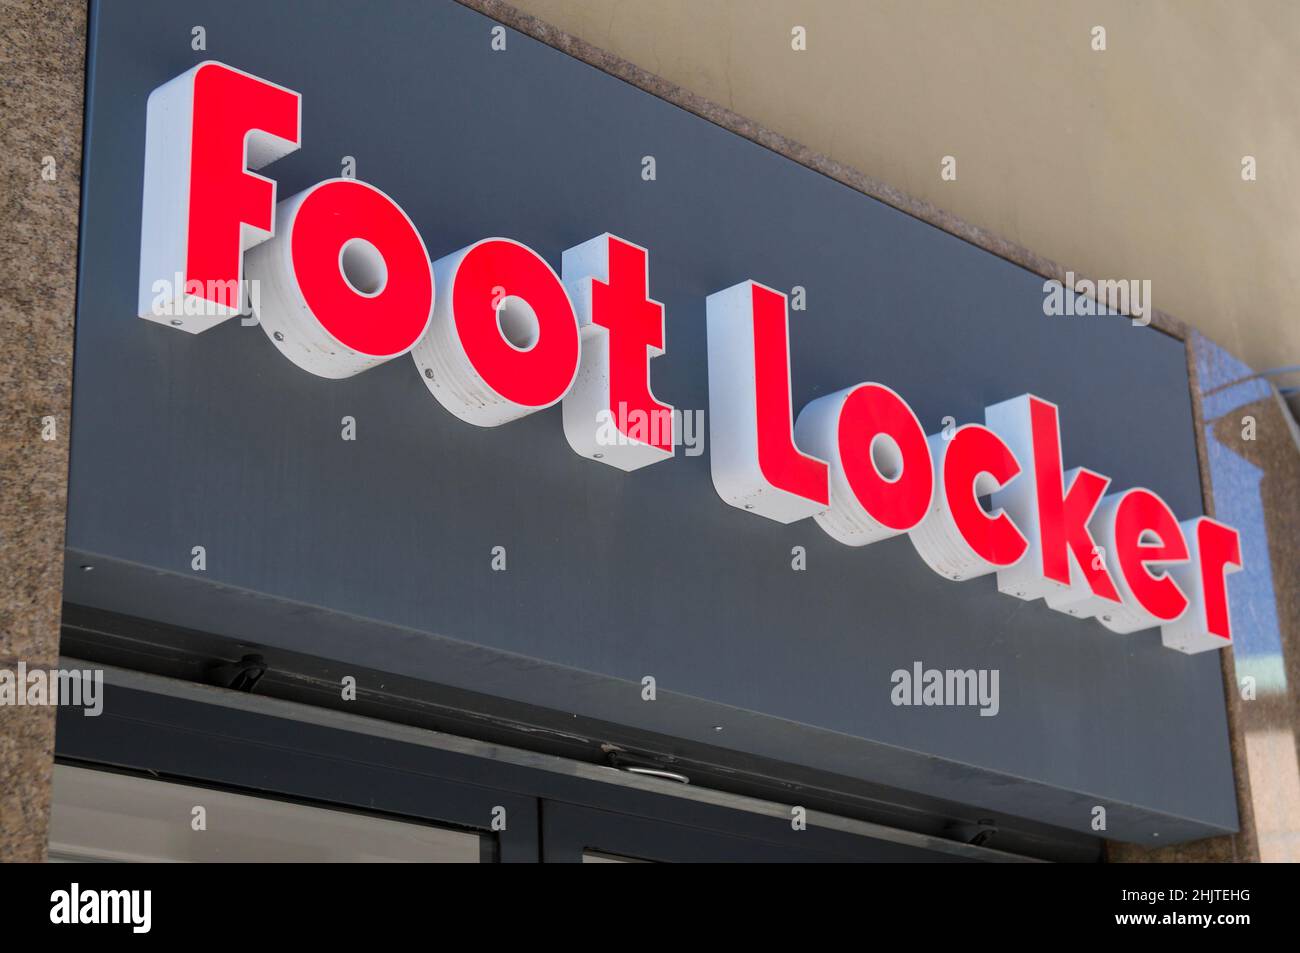 Arezzo, Tuscany, Italy - 1st October 2021 : Foot Locker sign hanging over a store in Arezzo, Italy. Foot Locker Retail, Inc. is an American sportswear Stock Photo